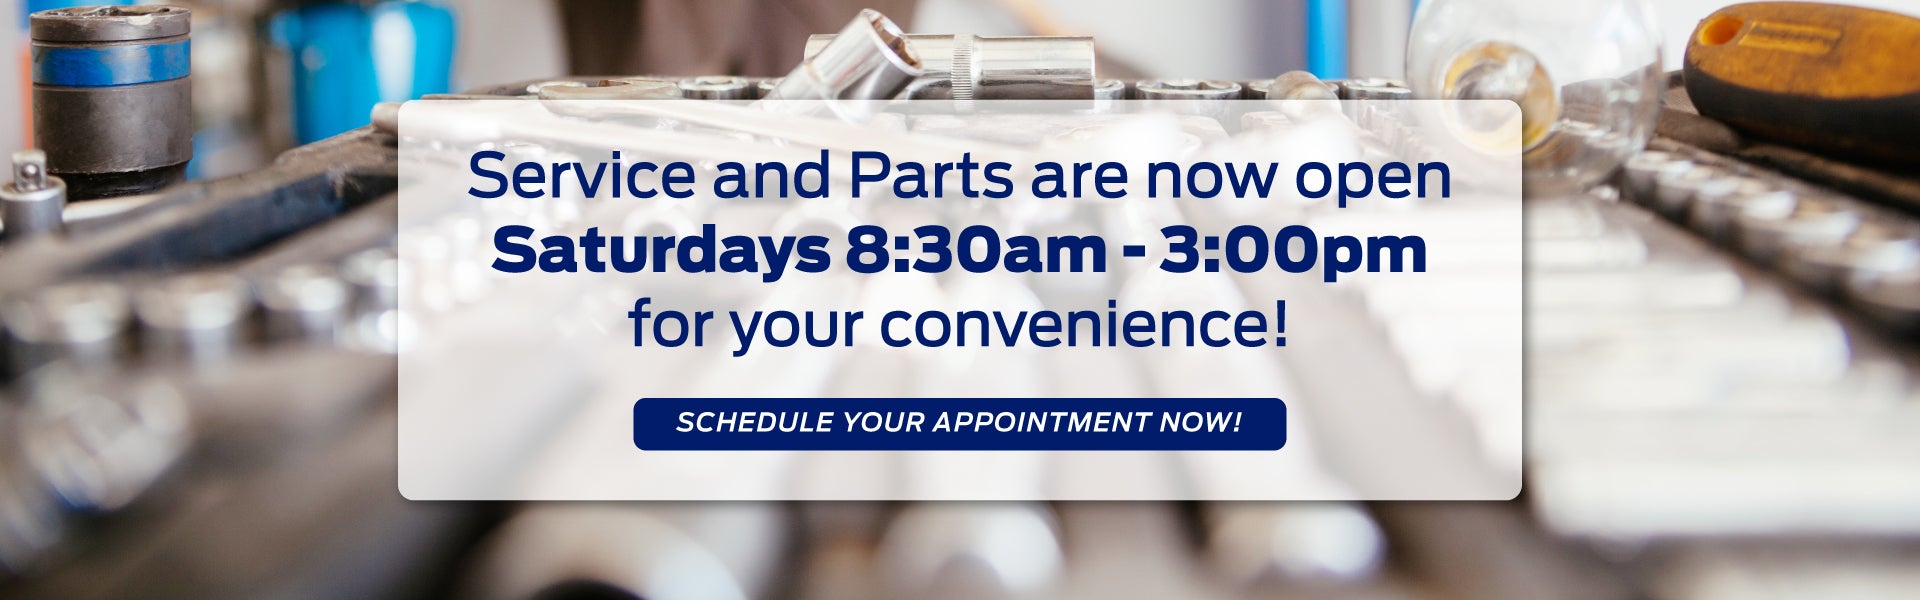 Service and Parts Open Saturdays 